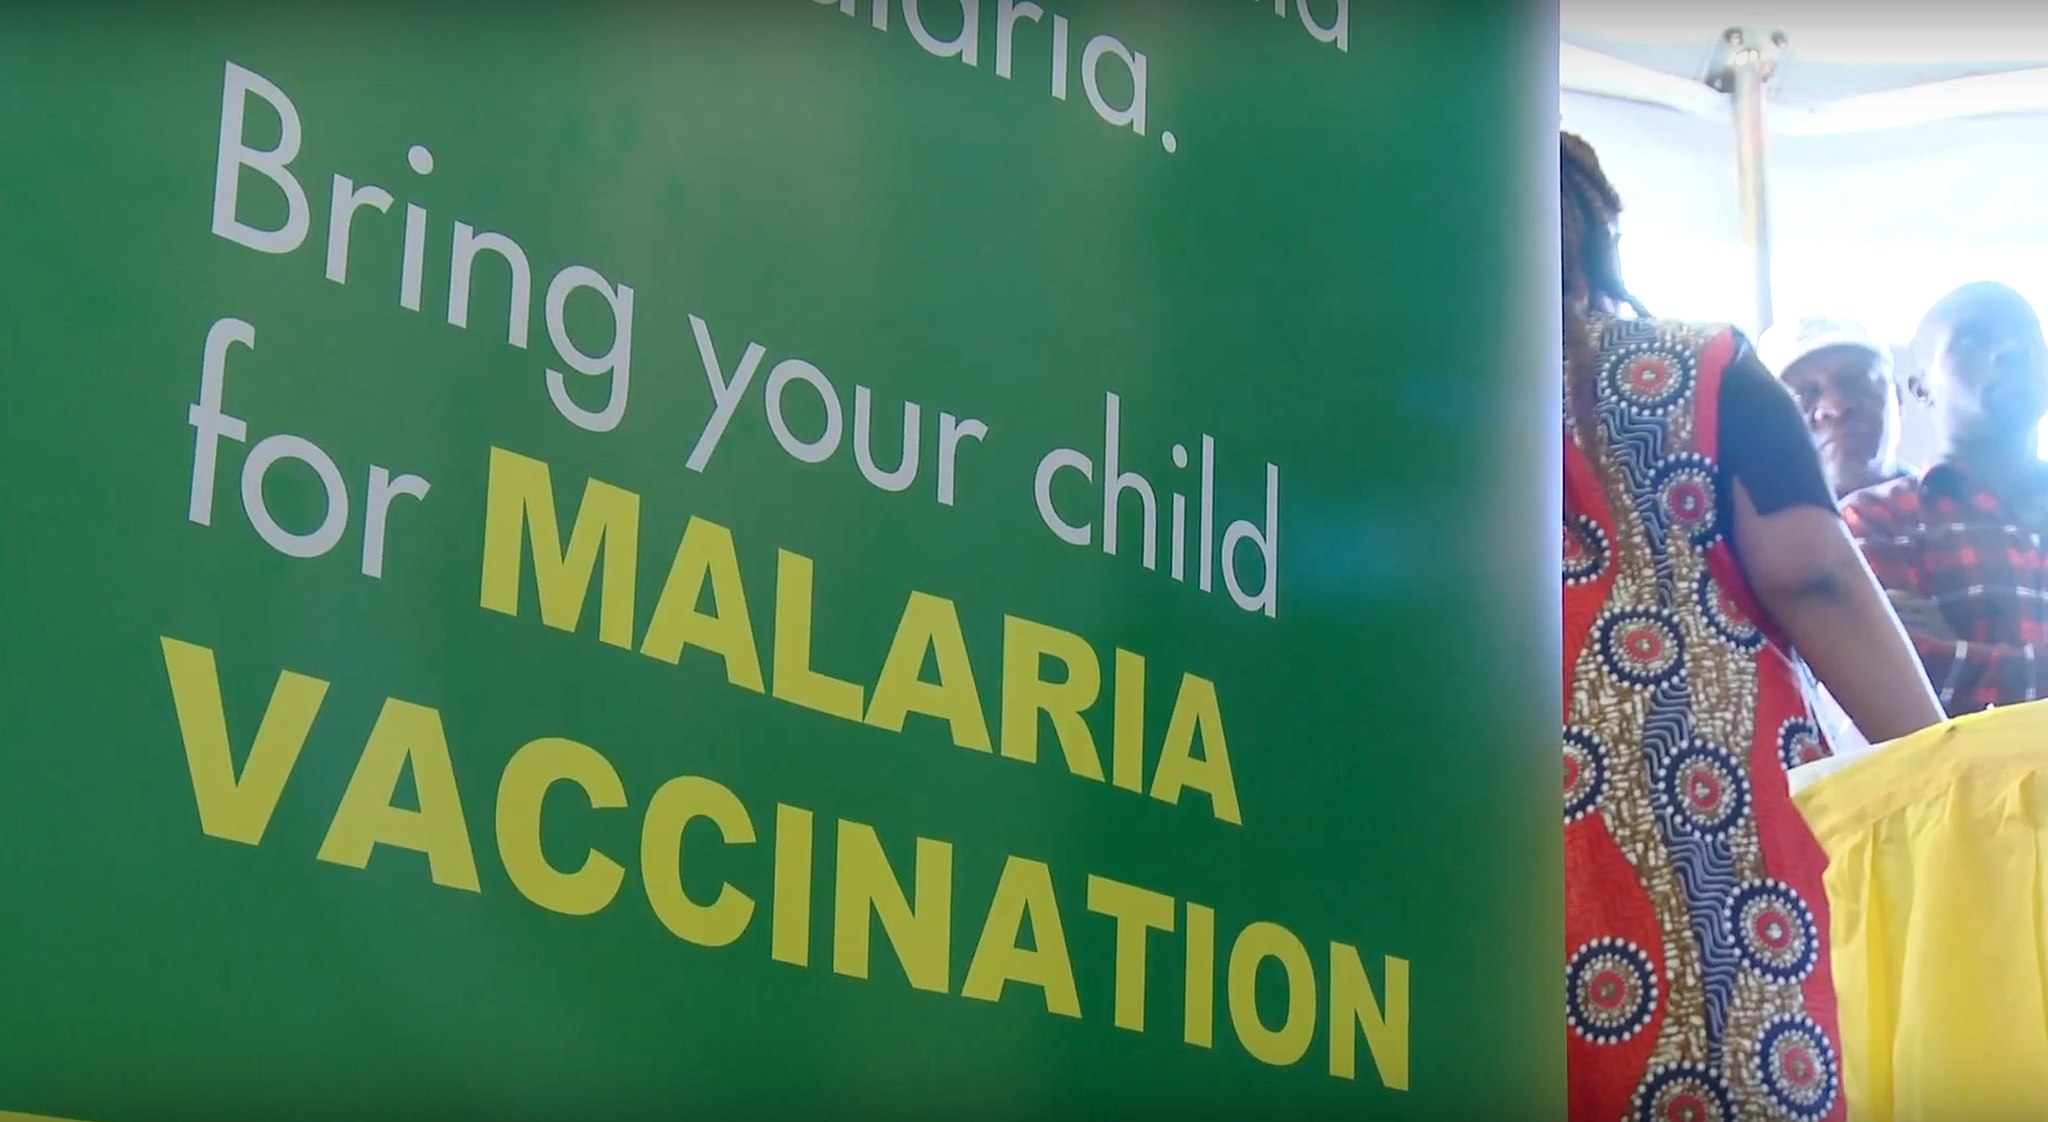 Photograph of sign saying 'bring your child for malaria vaccine'